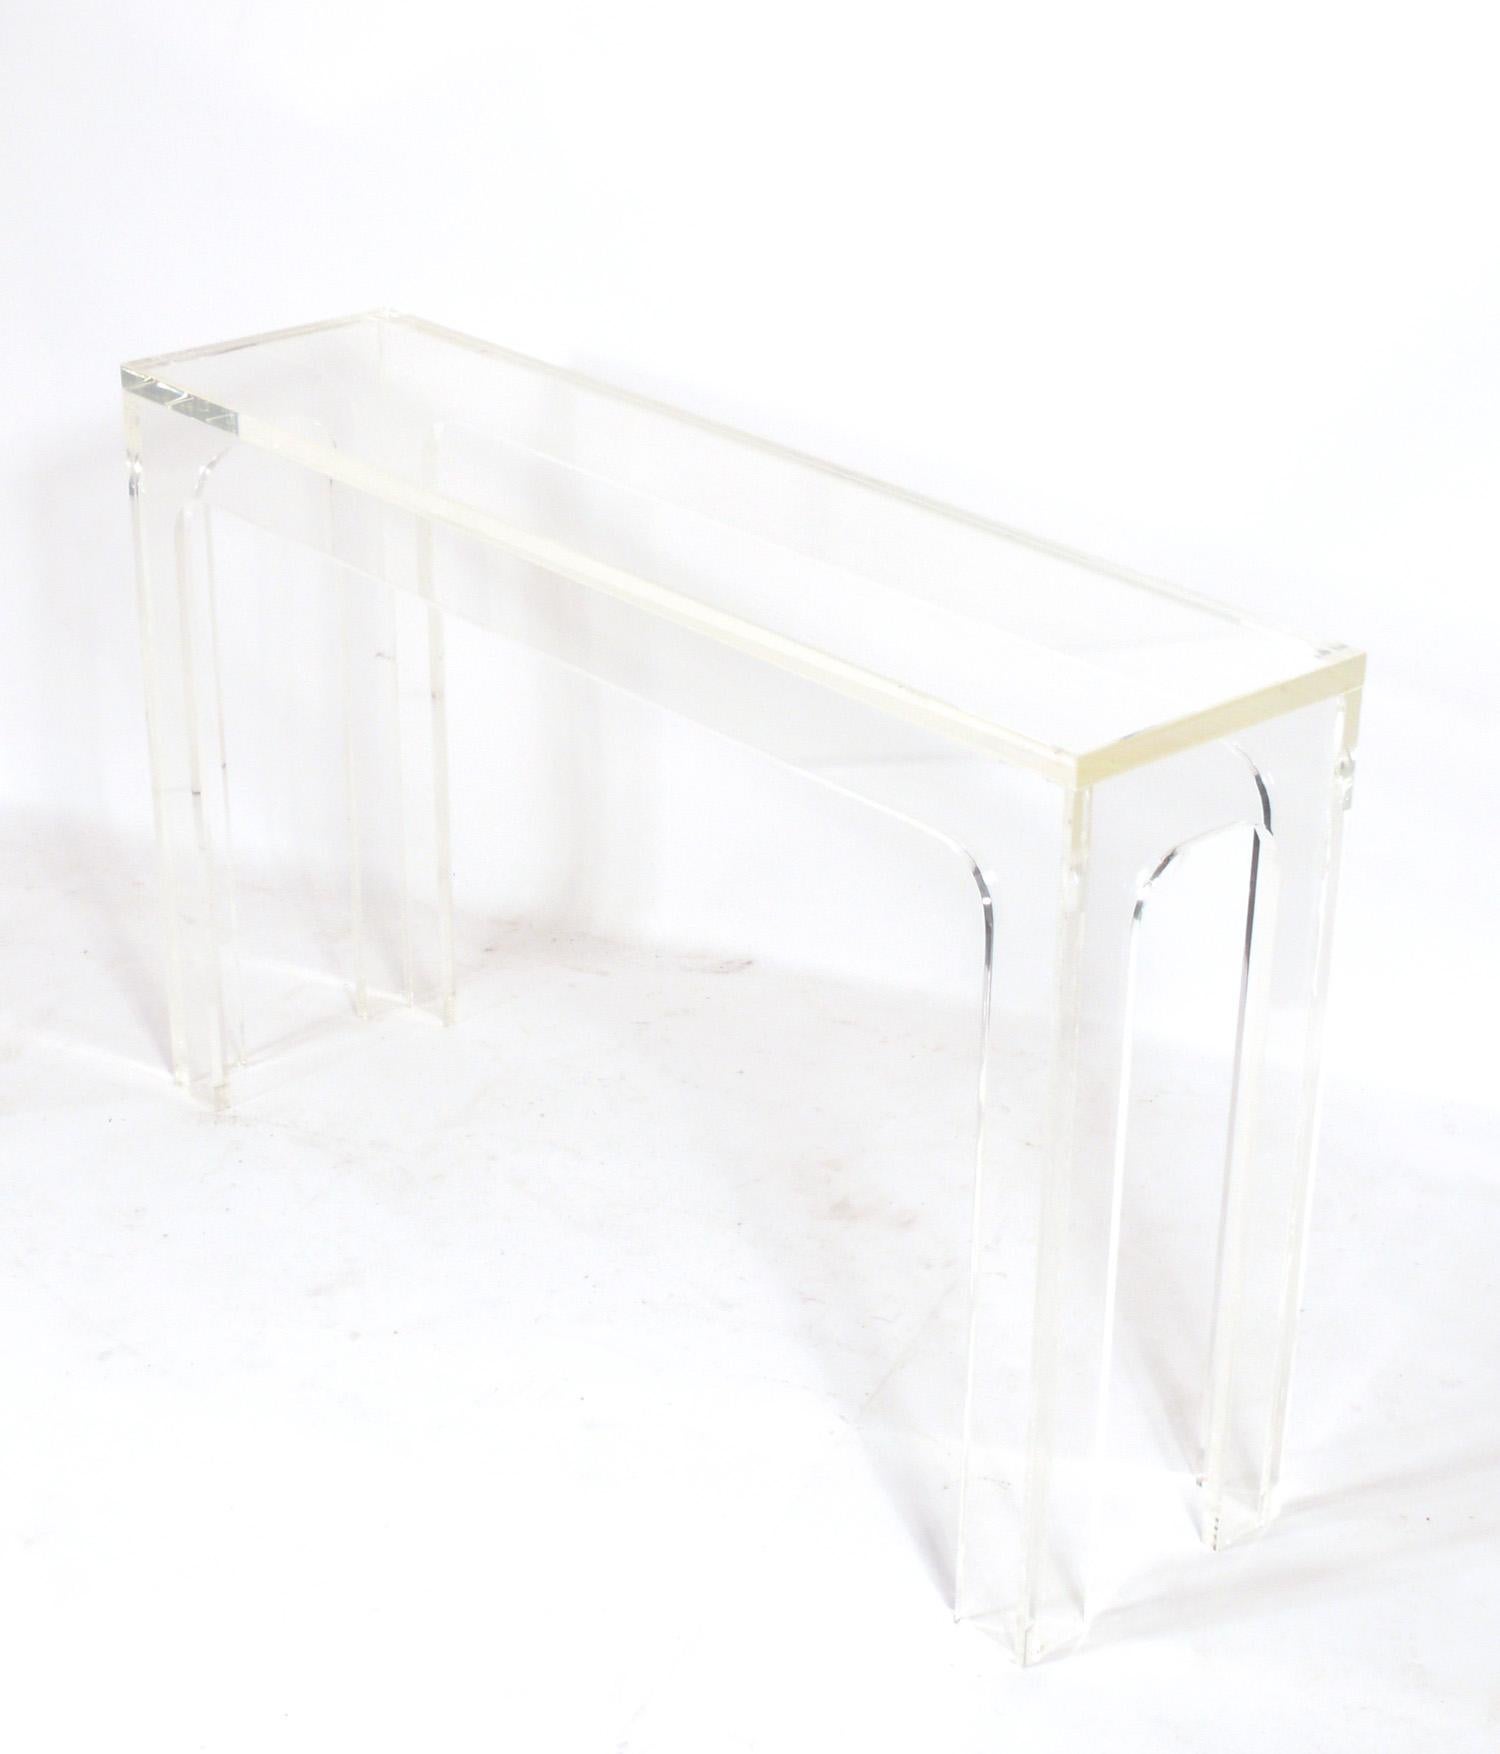 Chunky Lucite or Acrylic Console Table, in the manner of Charles Hollis Jones, American, circa 1960s. This table is a versatile size and can be used as a console, desk, vanity, bar, or entertainment center.